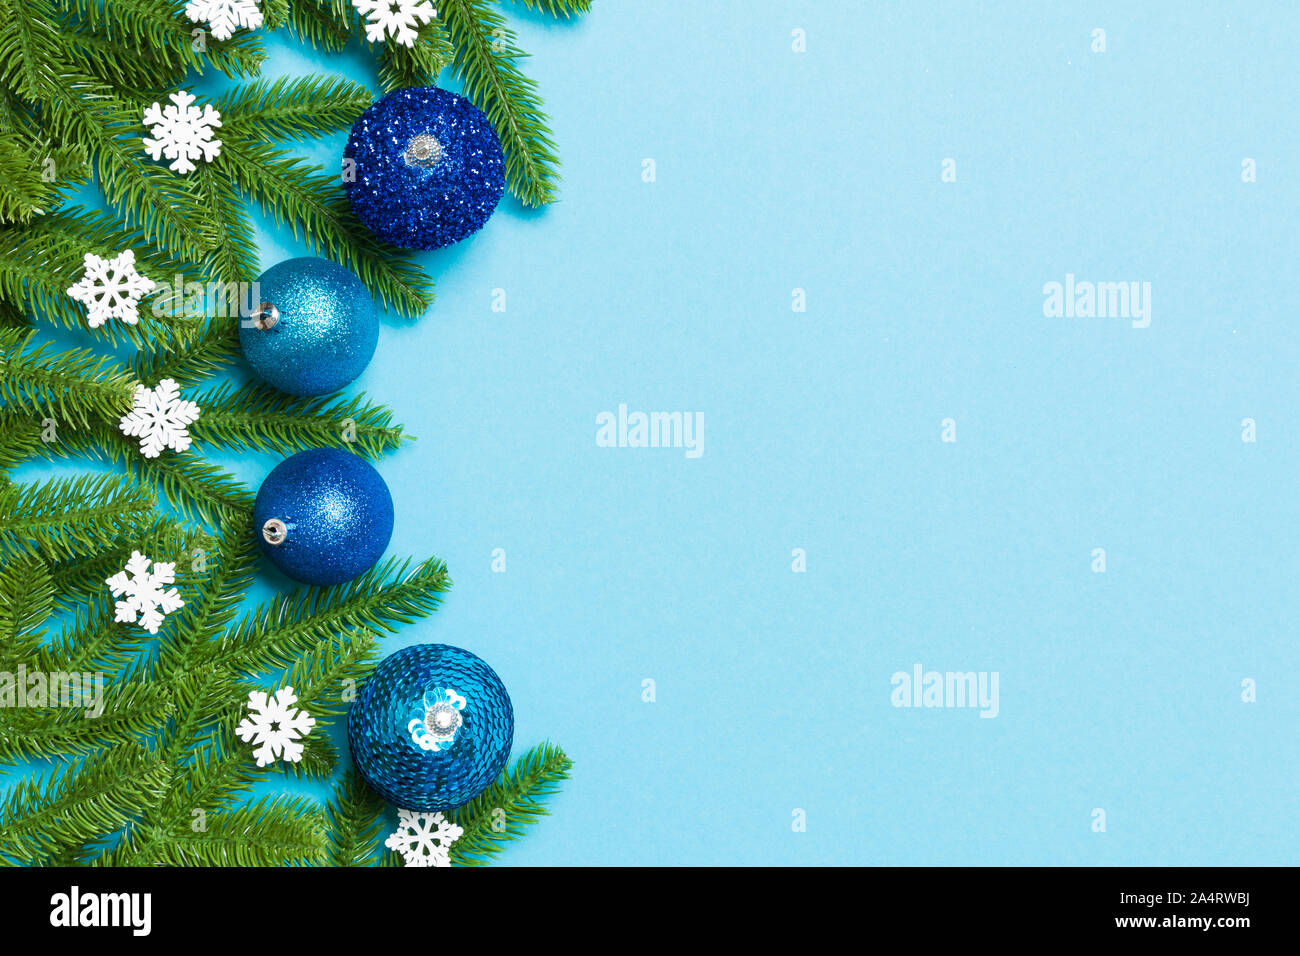 Christmas composition made of fir tree, balls and different decorations on colorful background. Top view of New Year Advent concept with empty space f Stock Photo